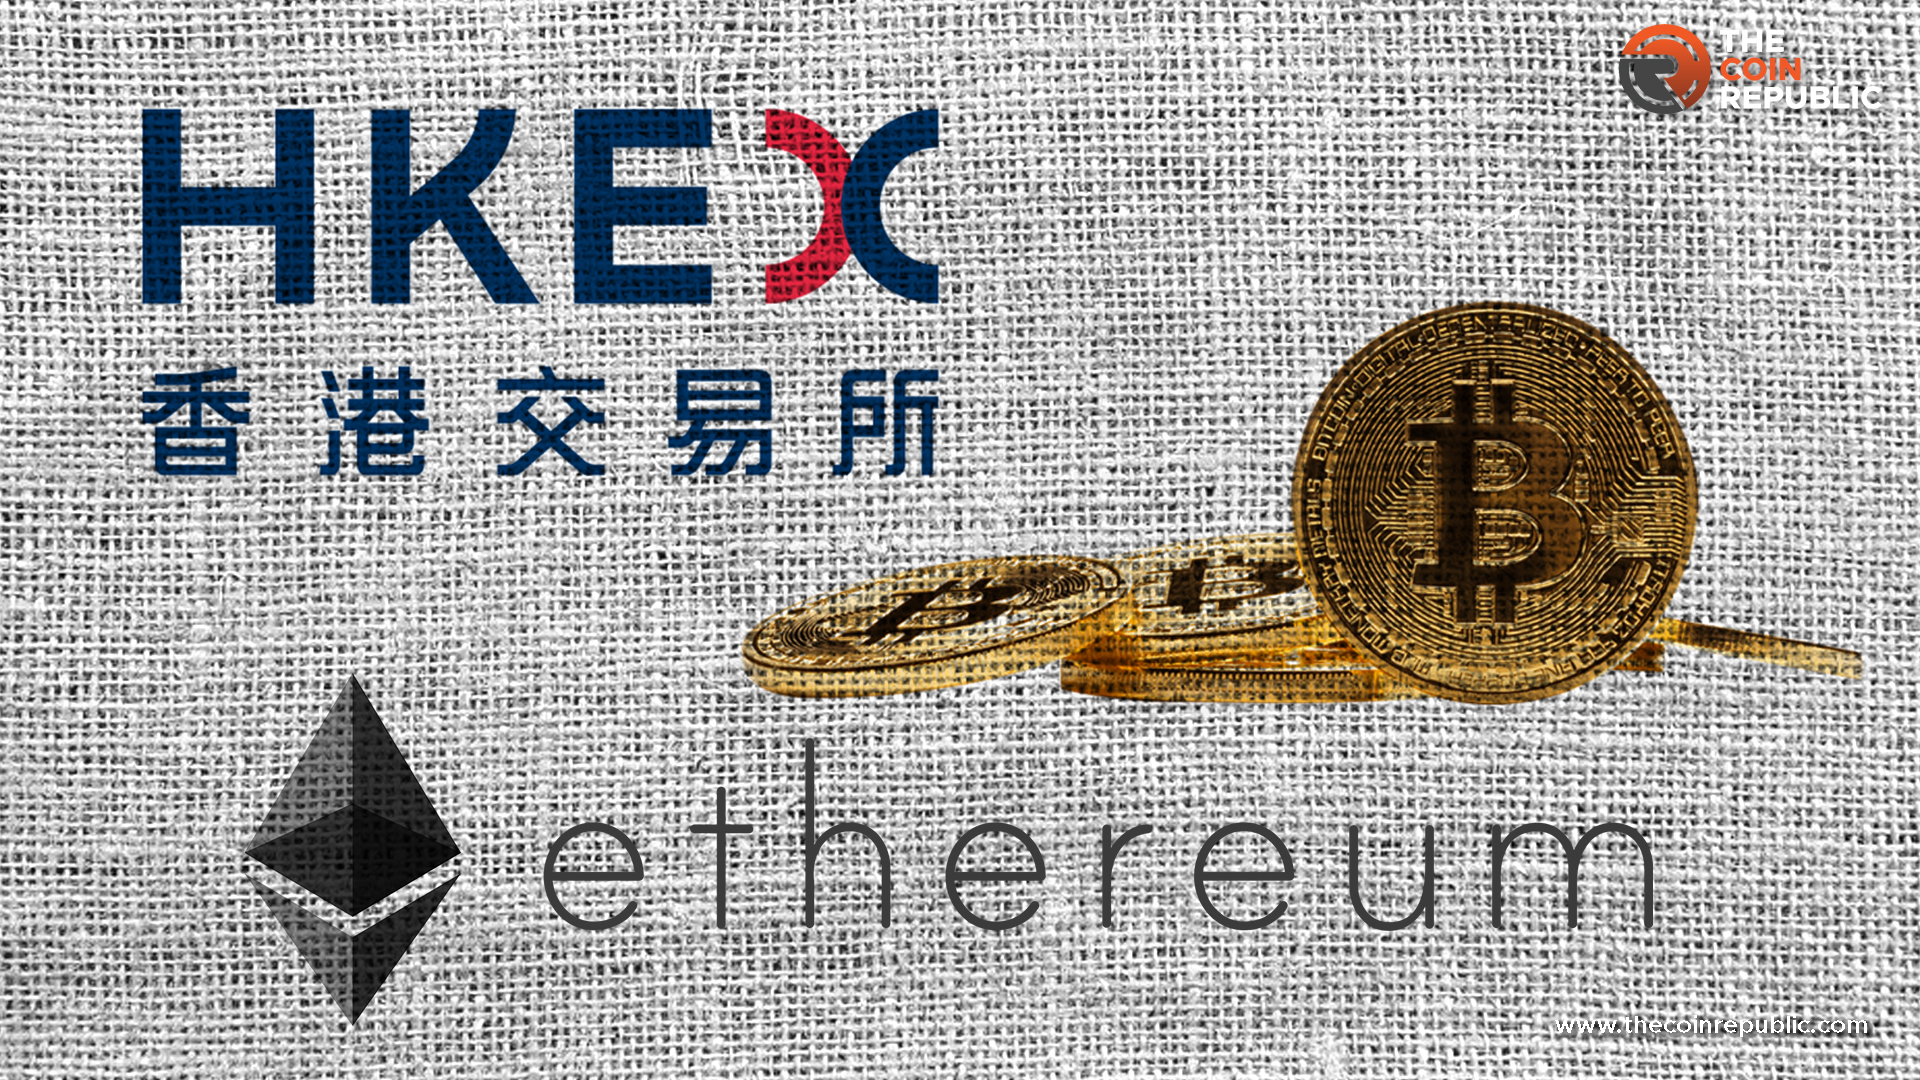 CSOP’s BTC and ETH’s ETF will be listed on Hong Kong Stock Exchange on December 16